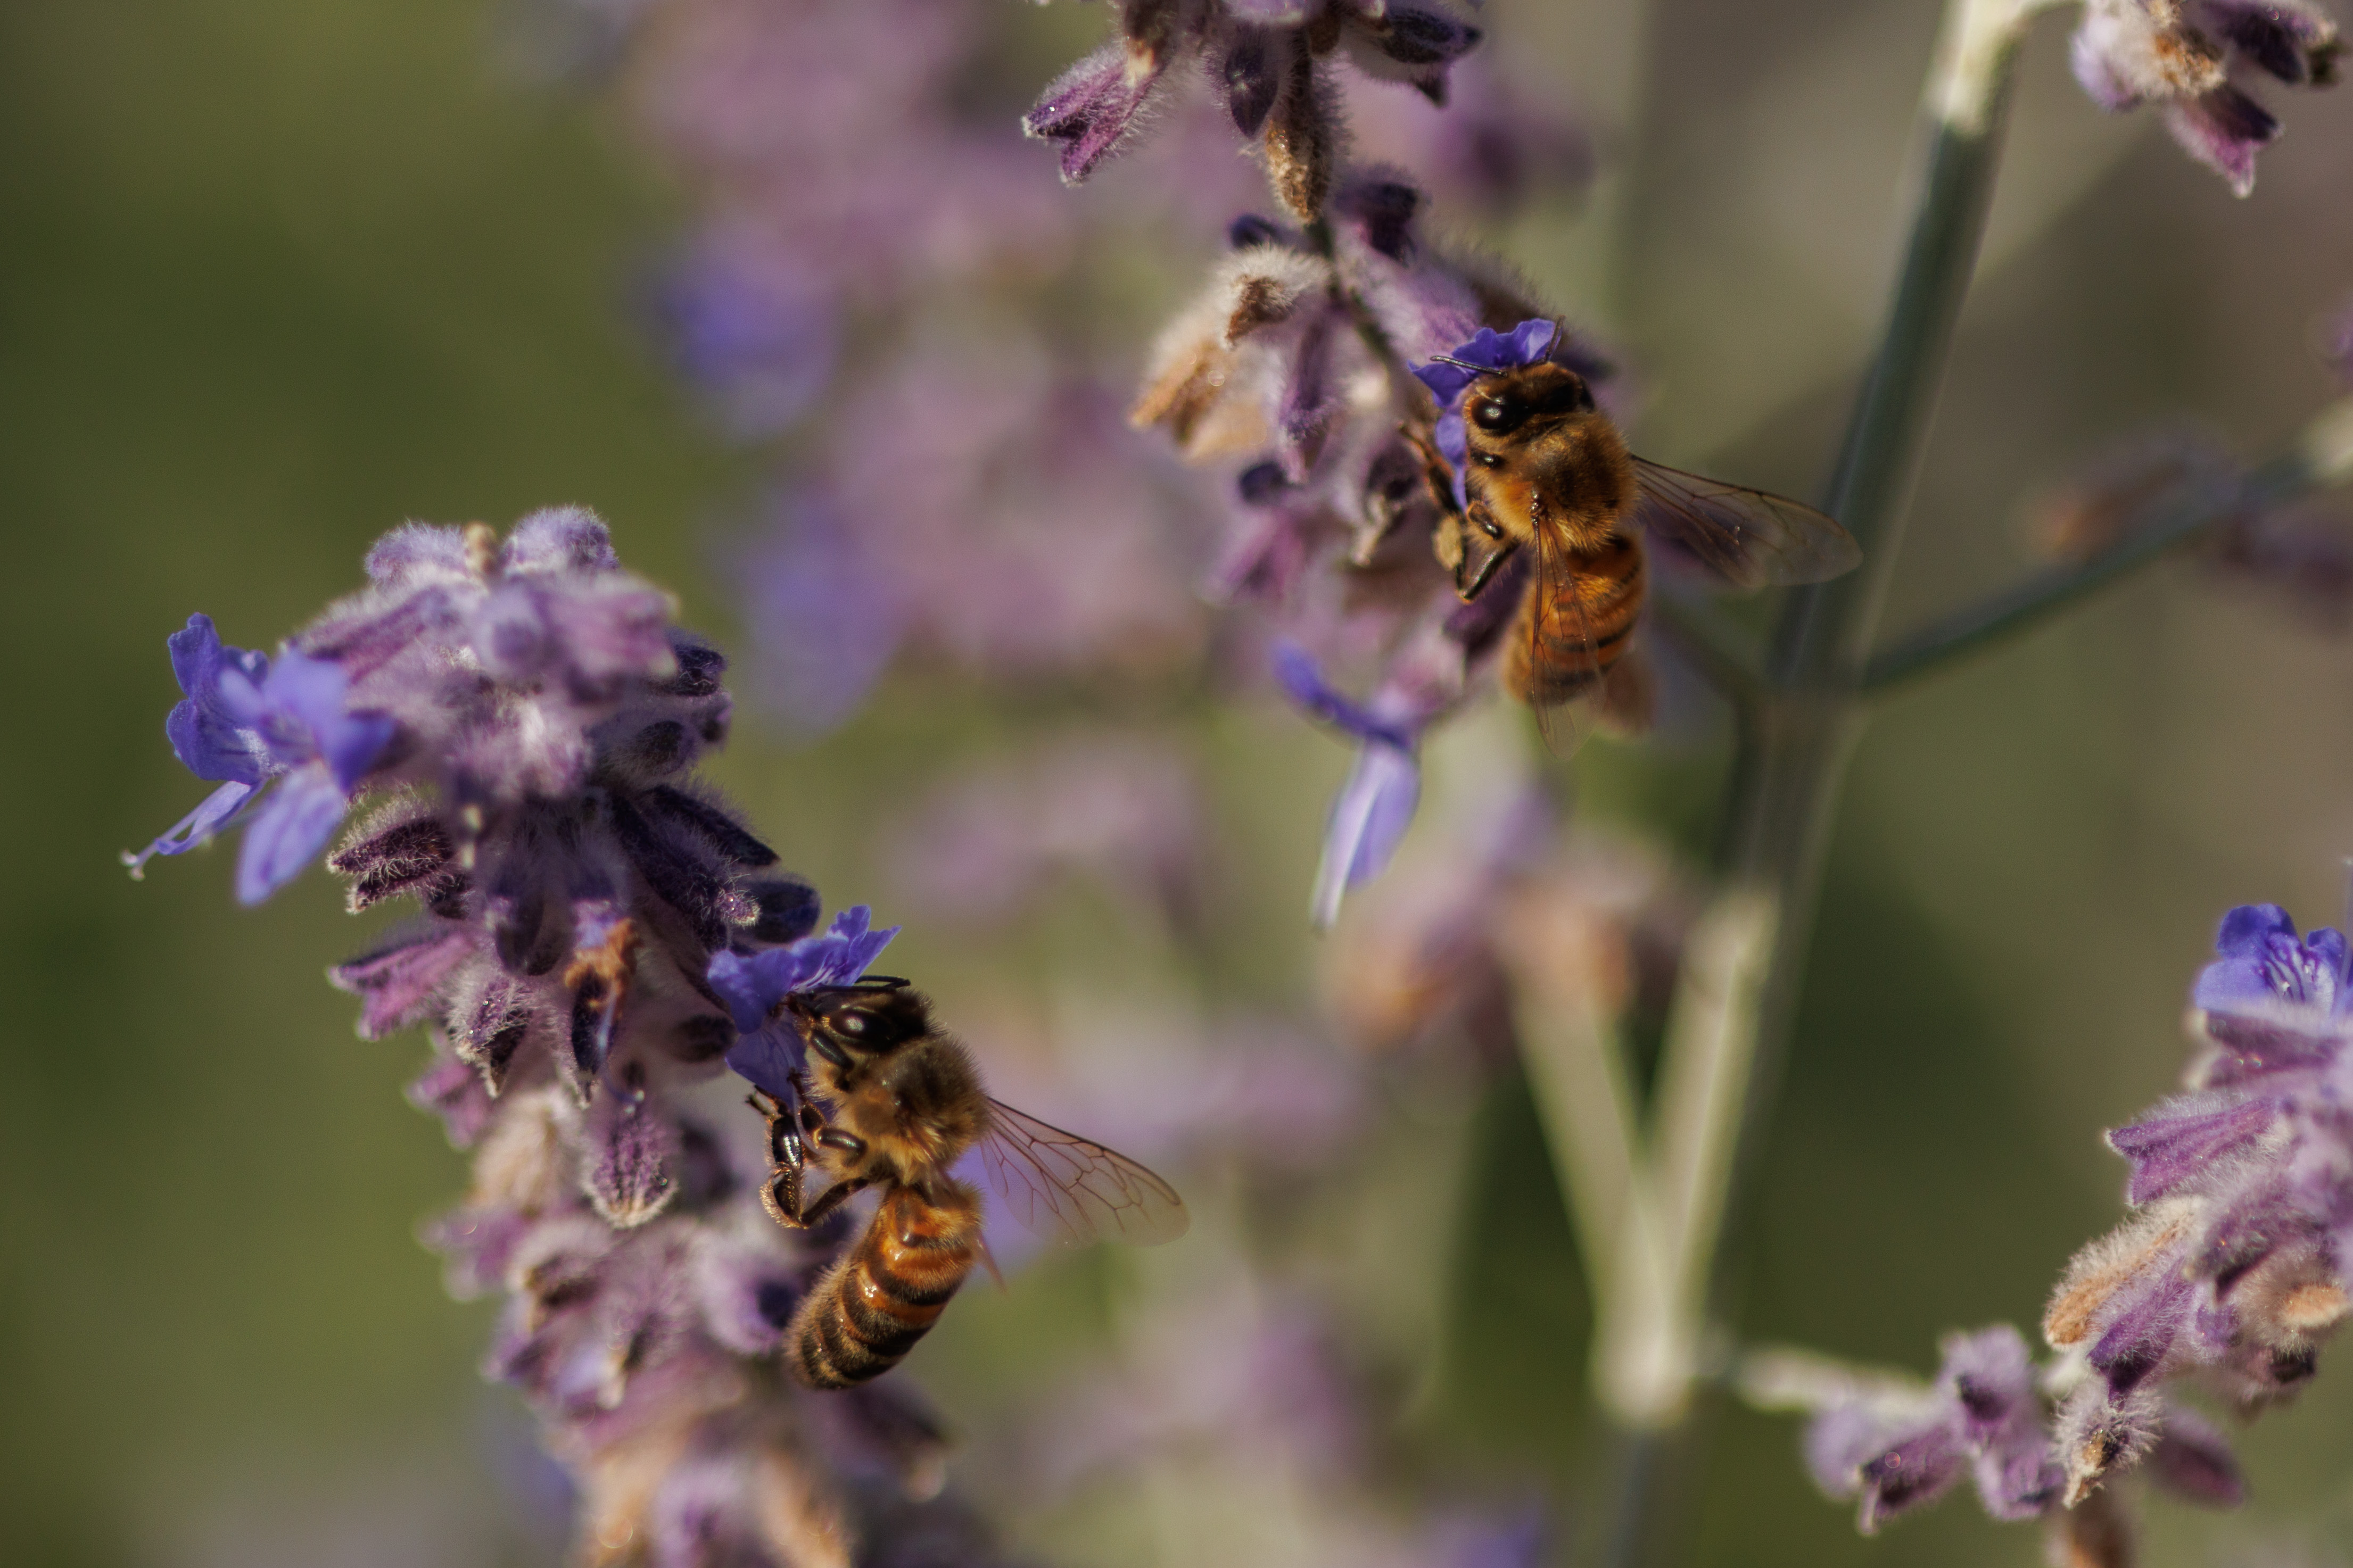 Bees Canon EOS R10 sample image. Bees on lavender.